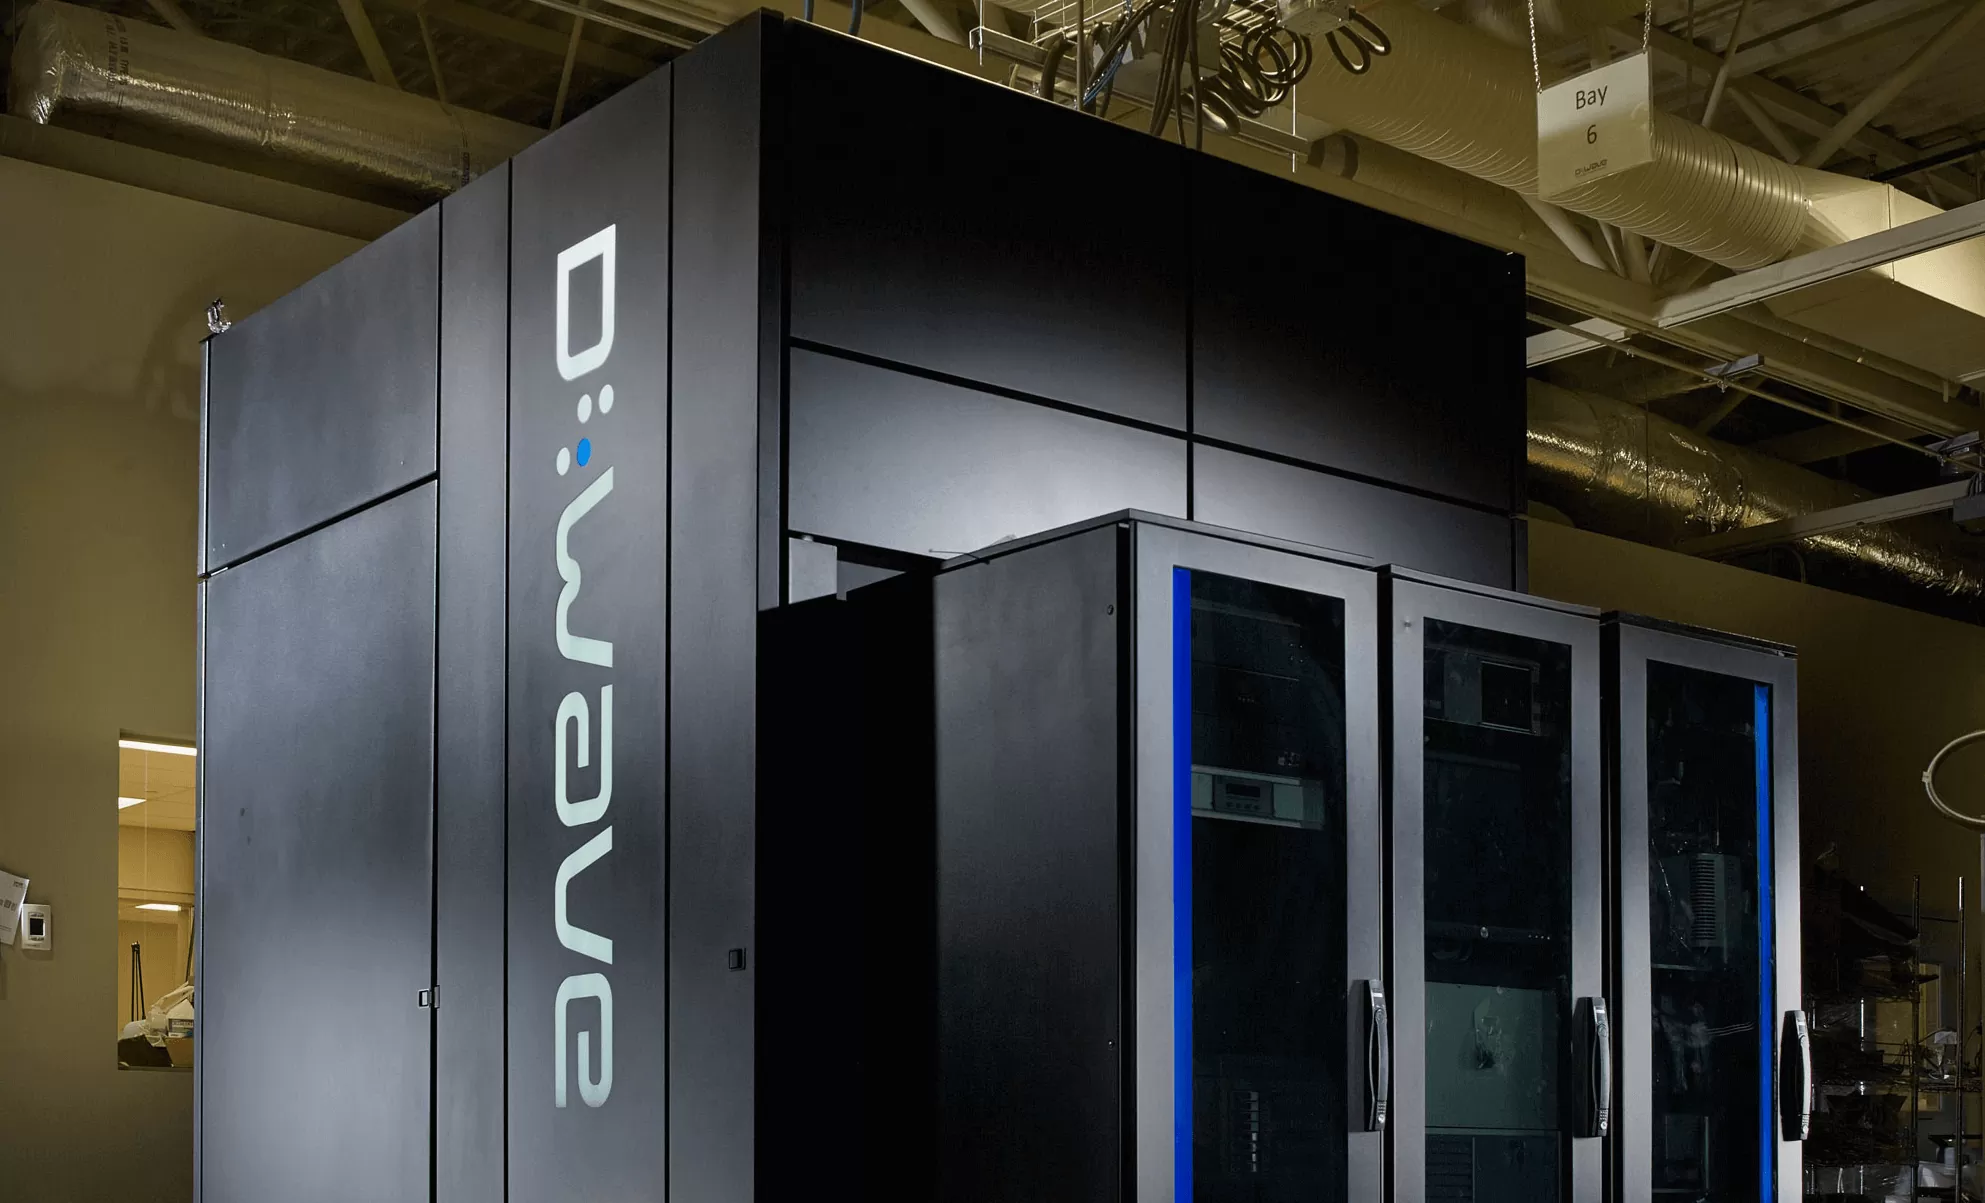 D-Wave is offering free access to its quantum computers for Covid-19 researchers